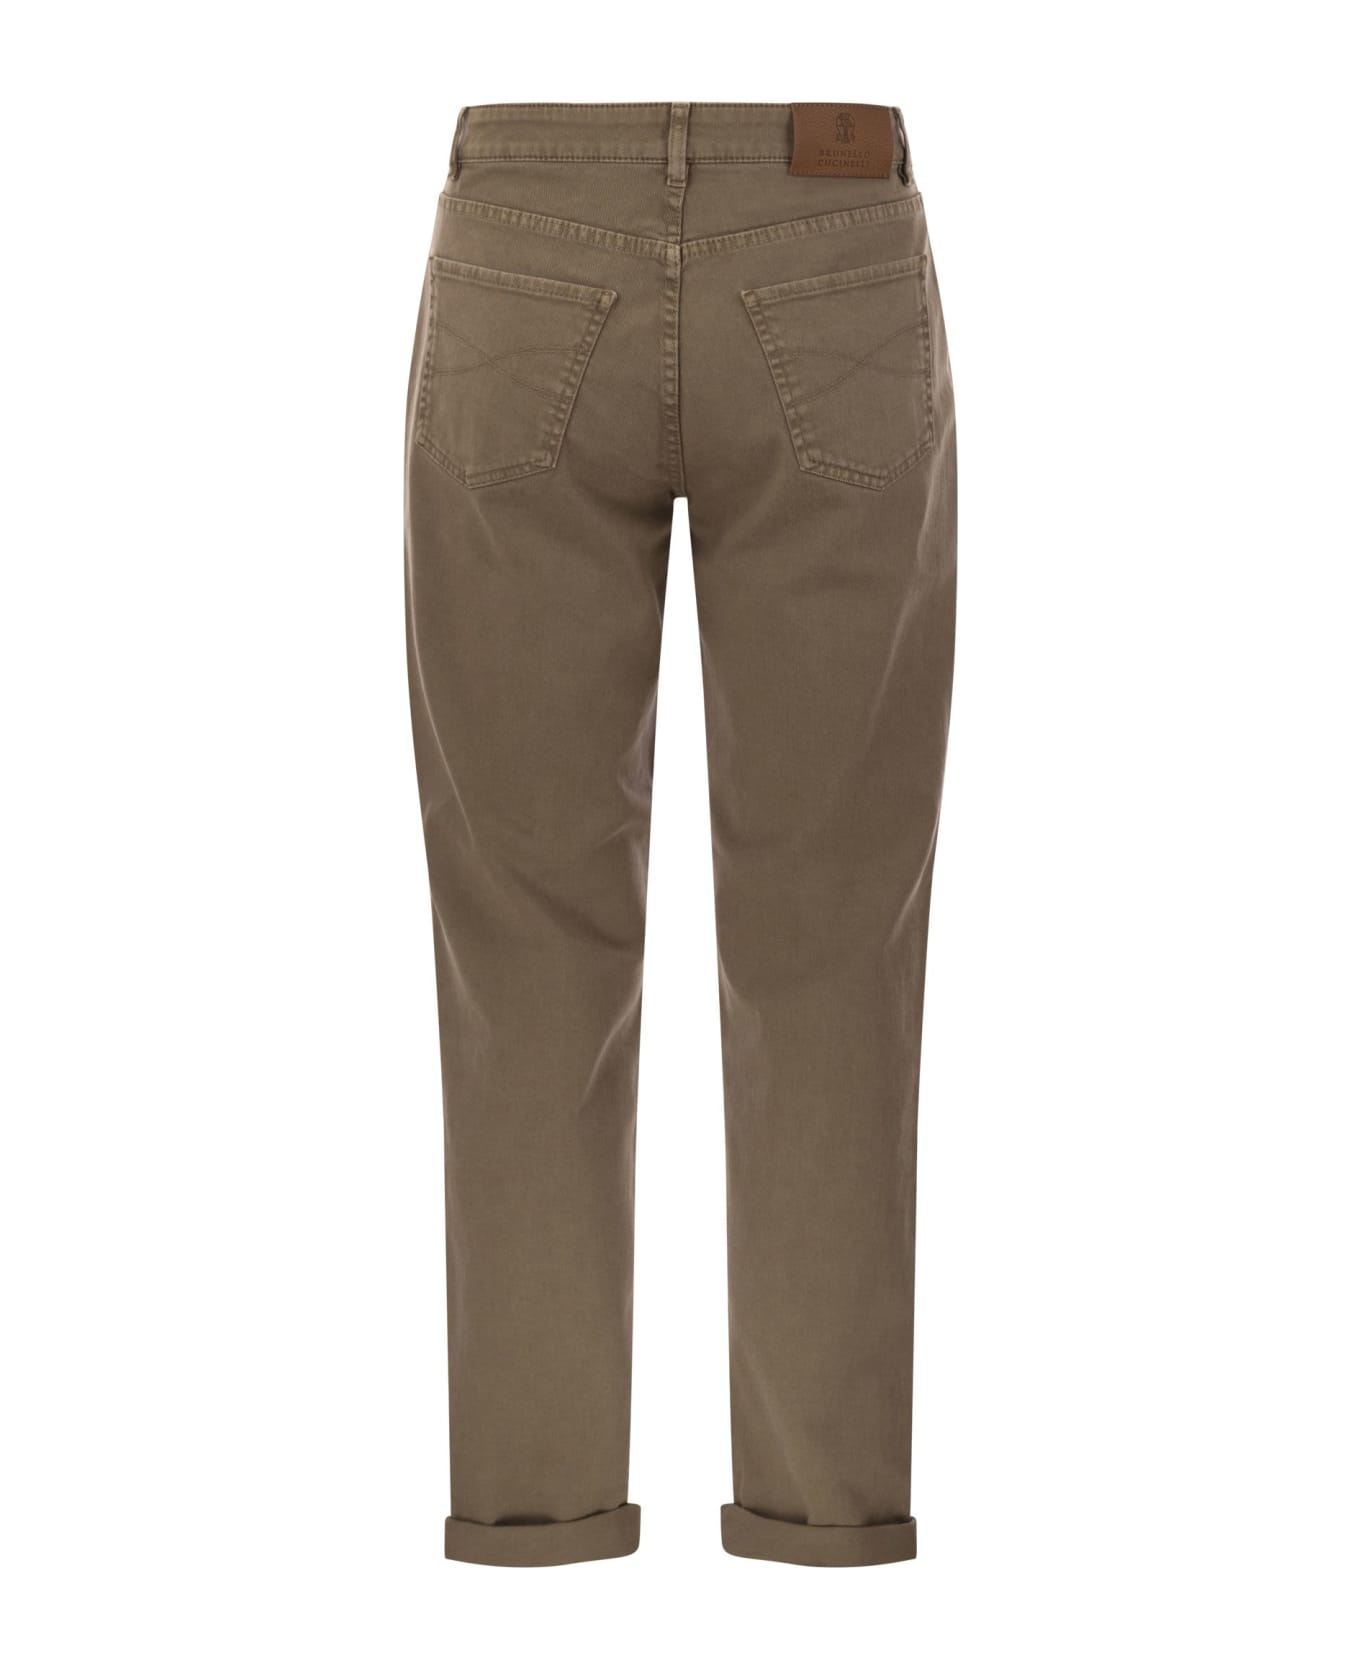 Brunello Cucinelli Five-pocket Traditional Fit Trousers In Light Comfort-dyed Denim - Brown ボトムス